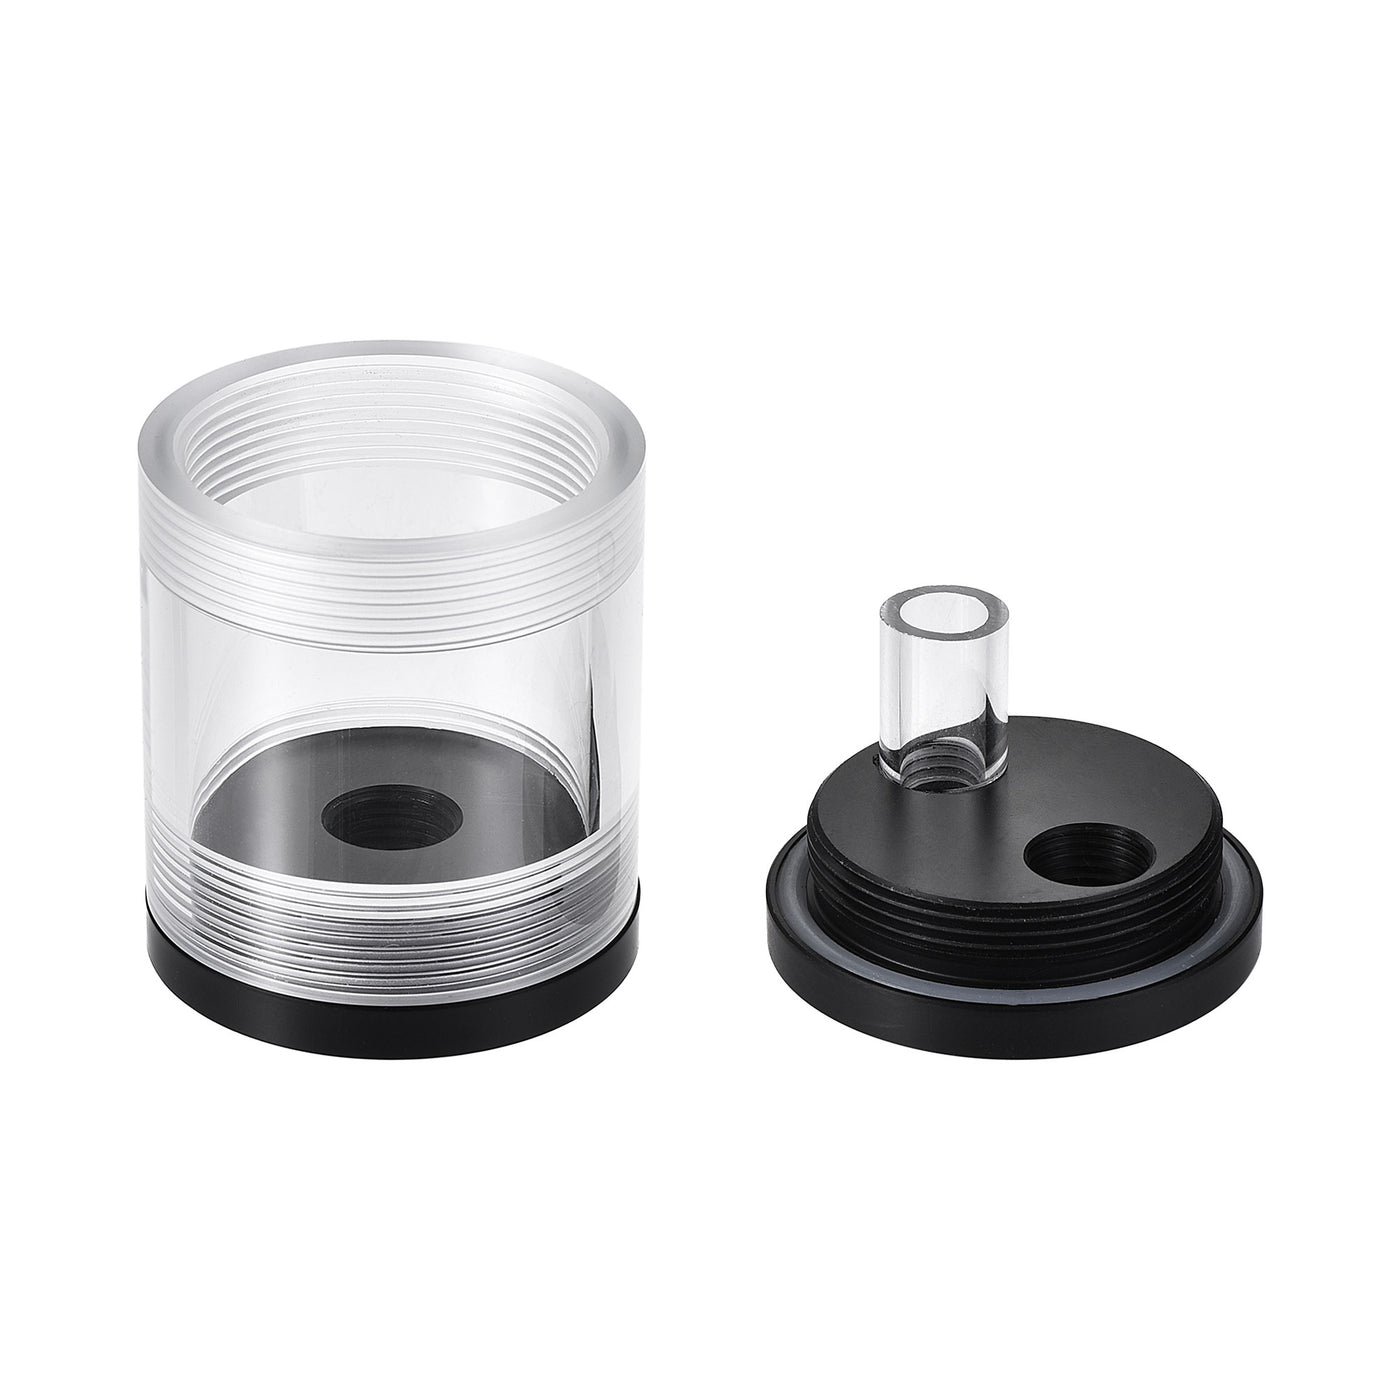 uxcell Uxcell Water Cooling Tank 50mm x 60mm Acrylic and POM 1 In 2 Out for PC CPU Cooled